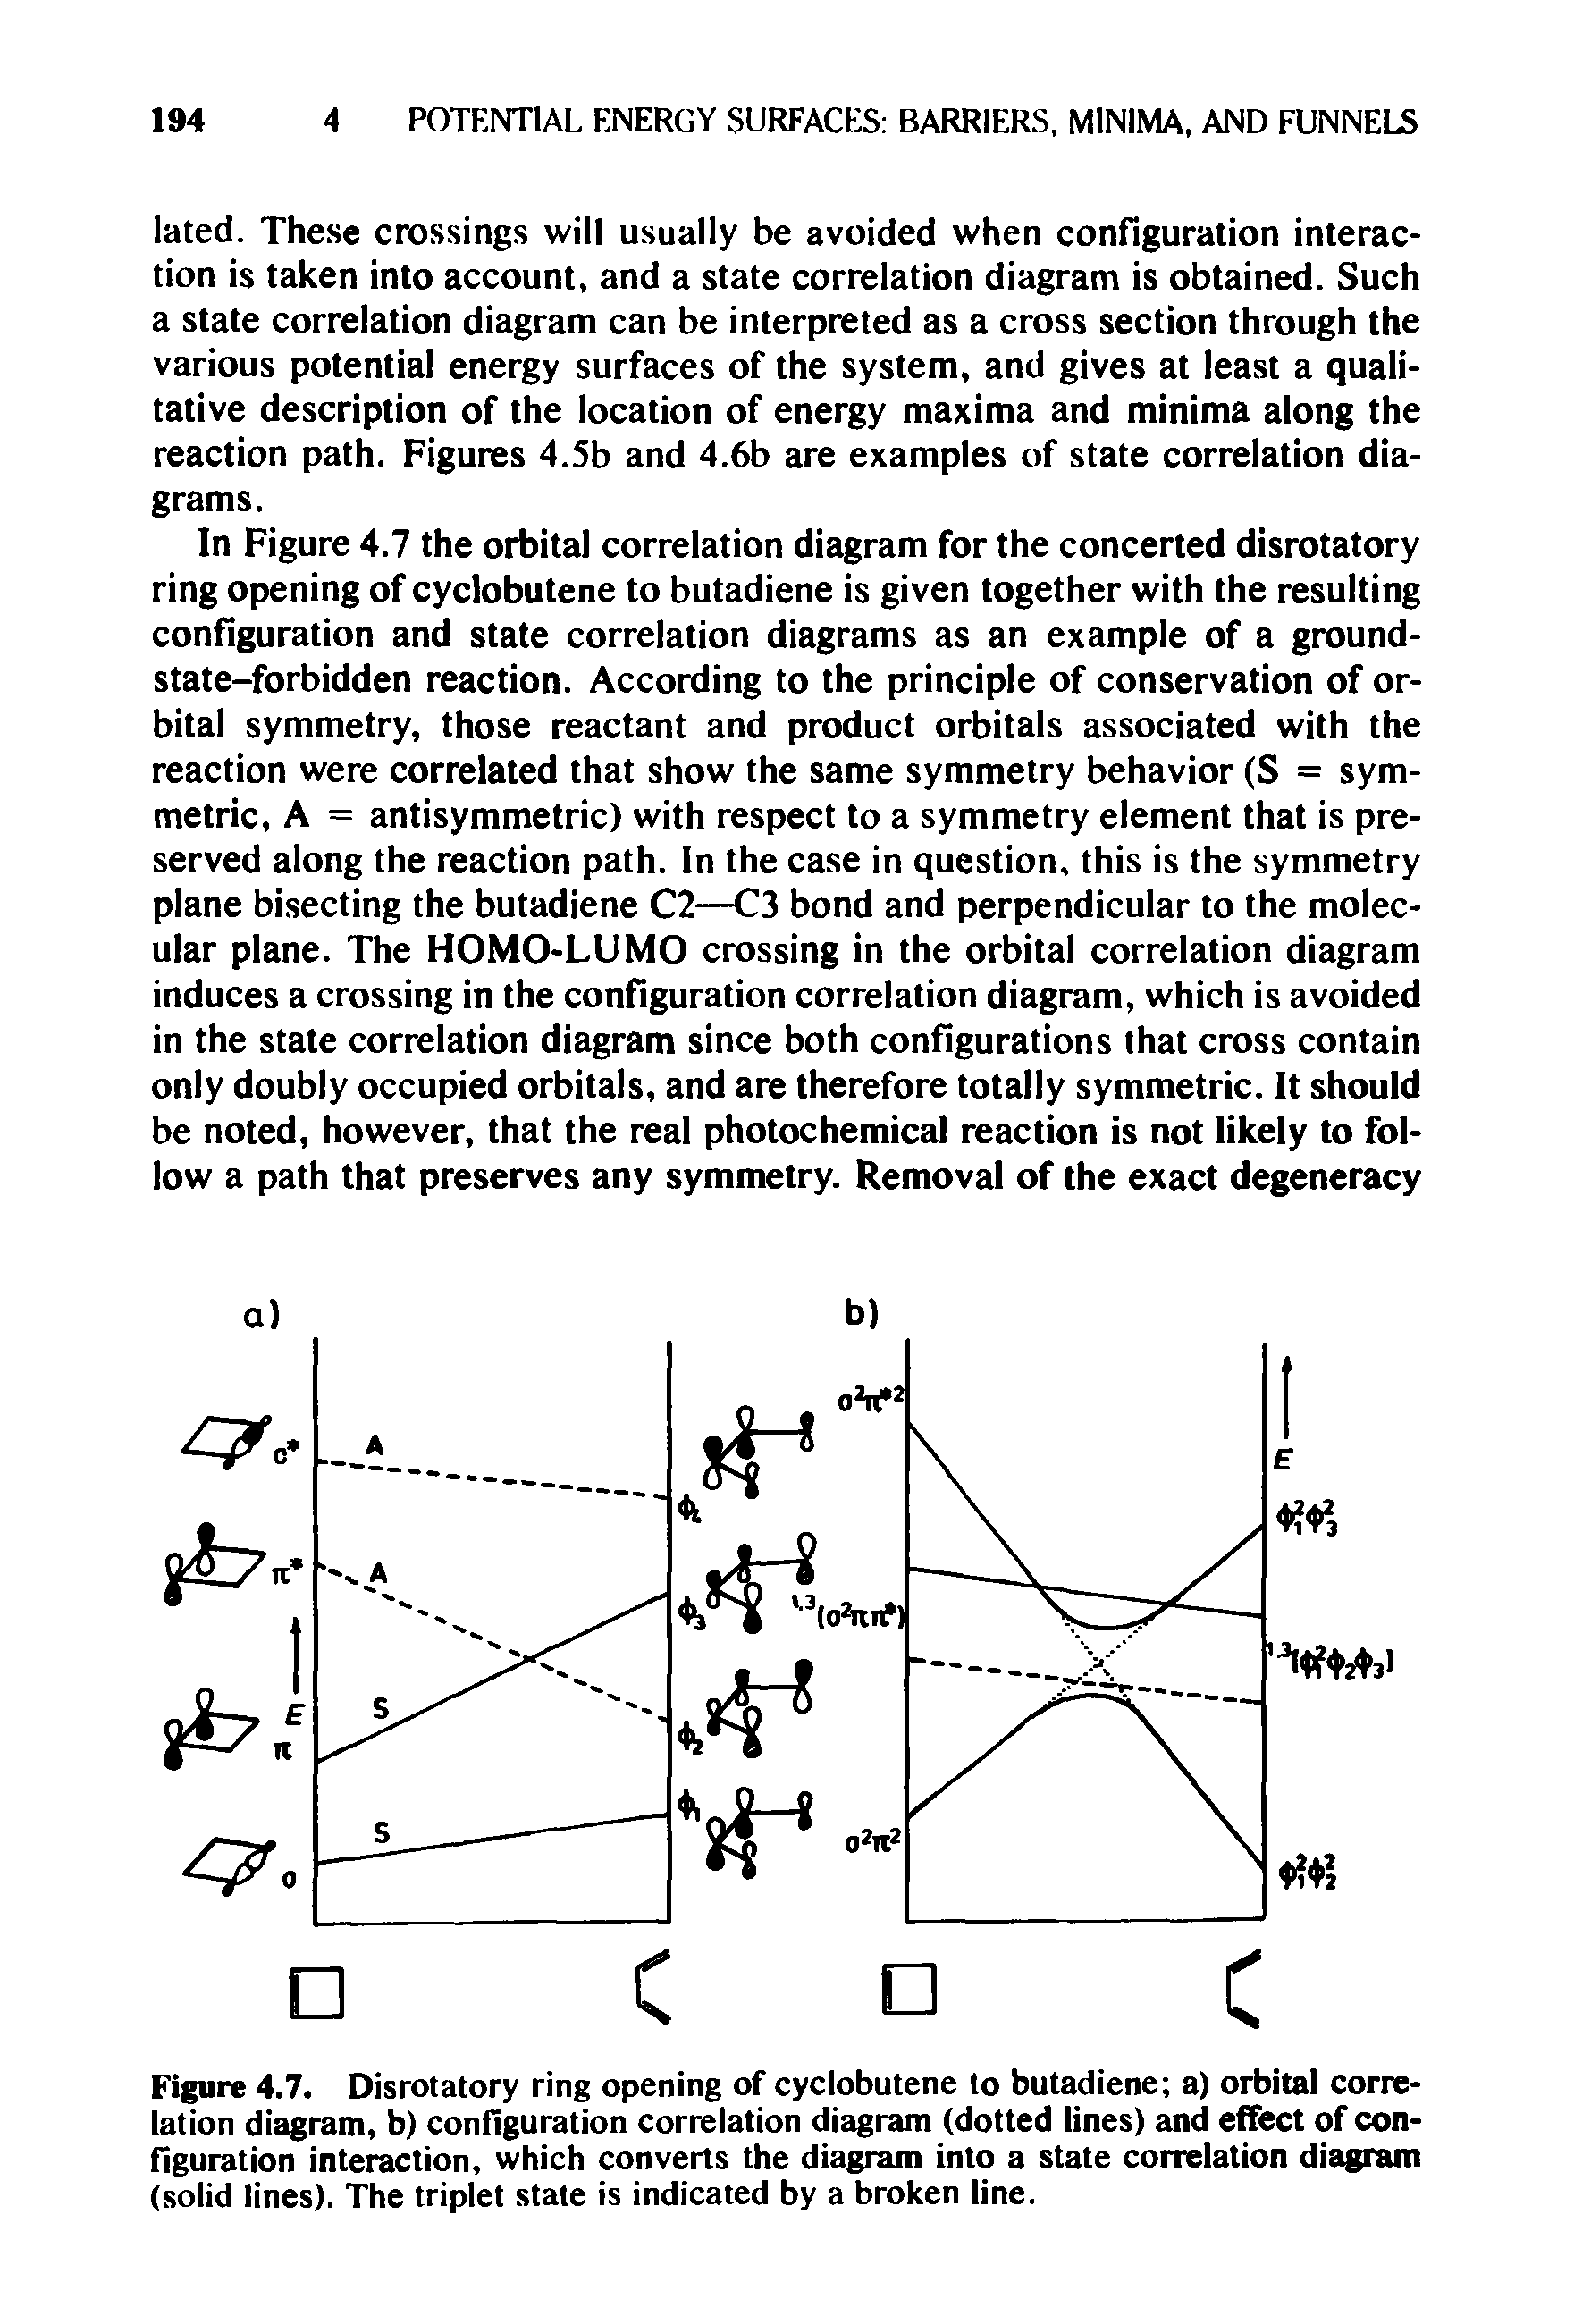 Figure 4.7. Disrotatory ring opening of cyclobutene to butadiene a) orbital correlation diagram, b) configuration correlation diagram (dotted lines) and effect of configuration interaction, which converts the diagram into a state correlation diagram (solid lines). The triplet state is indicated by a broken line.